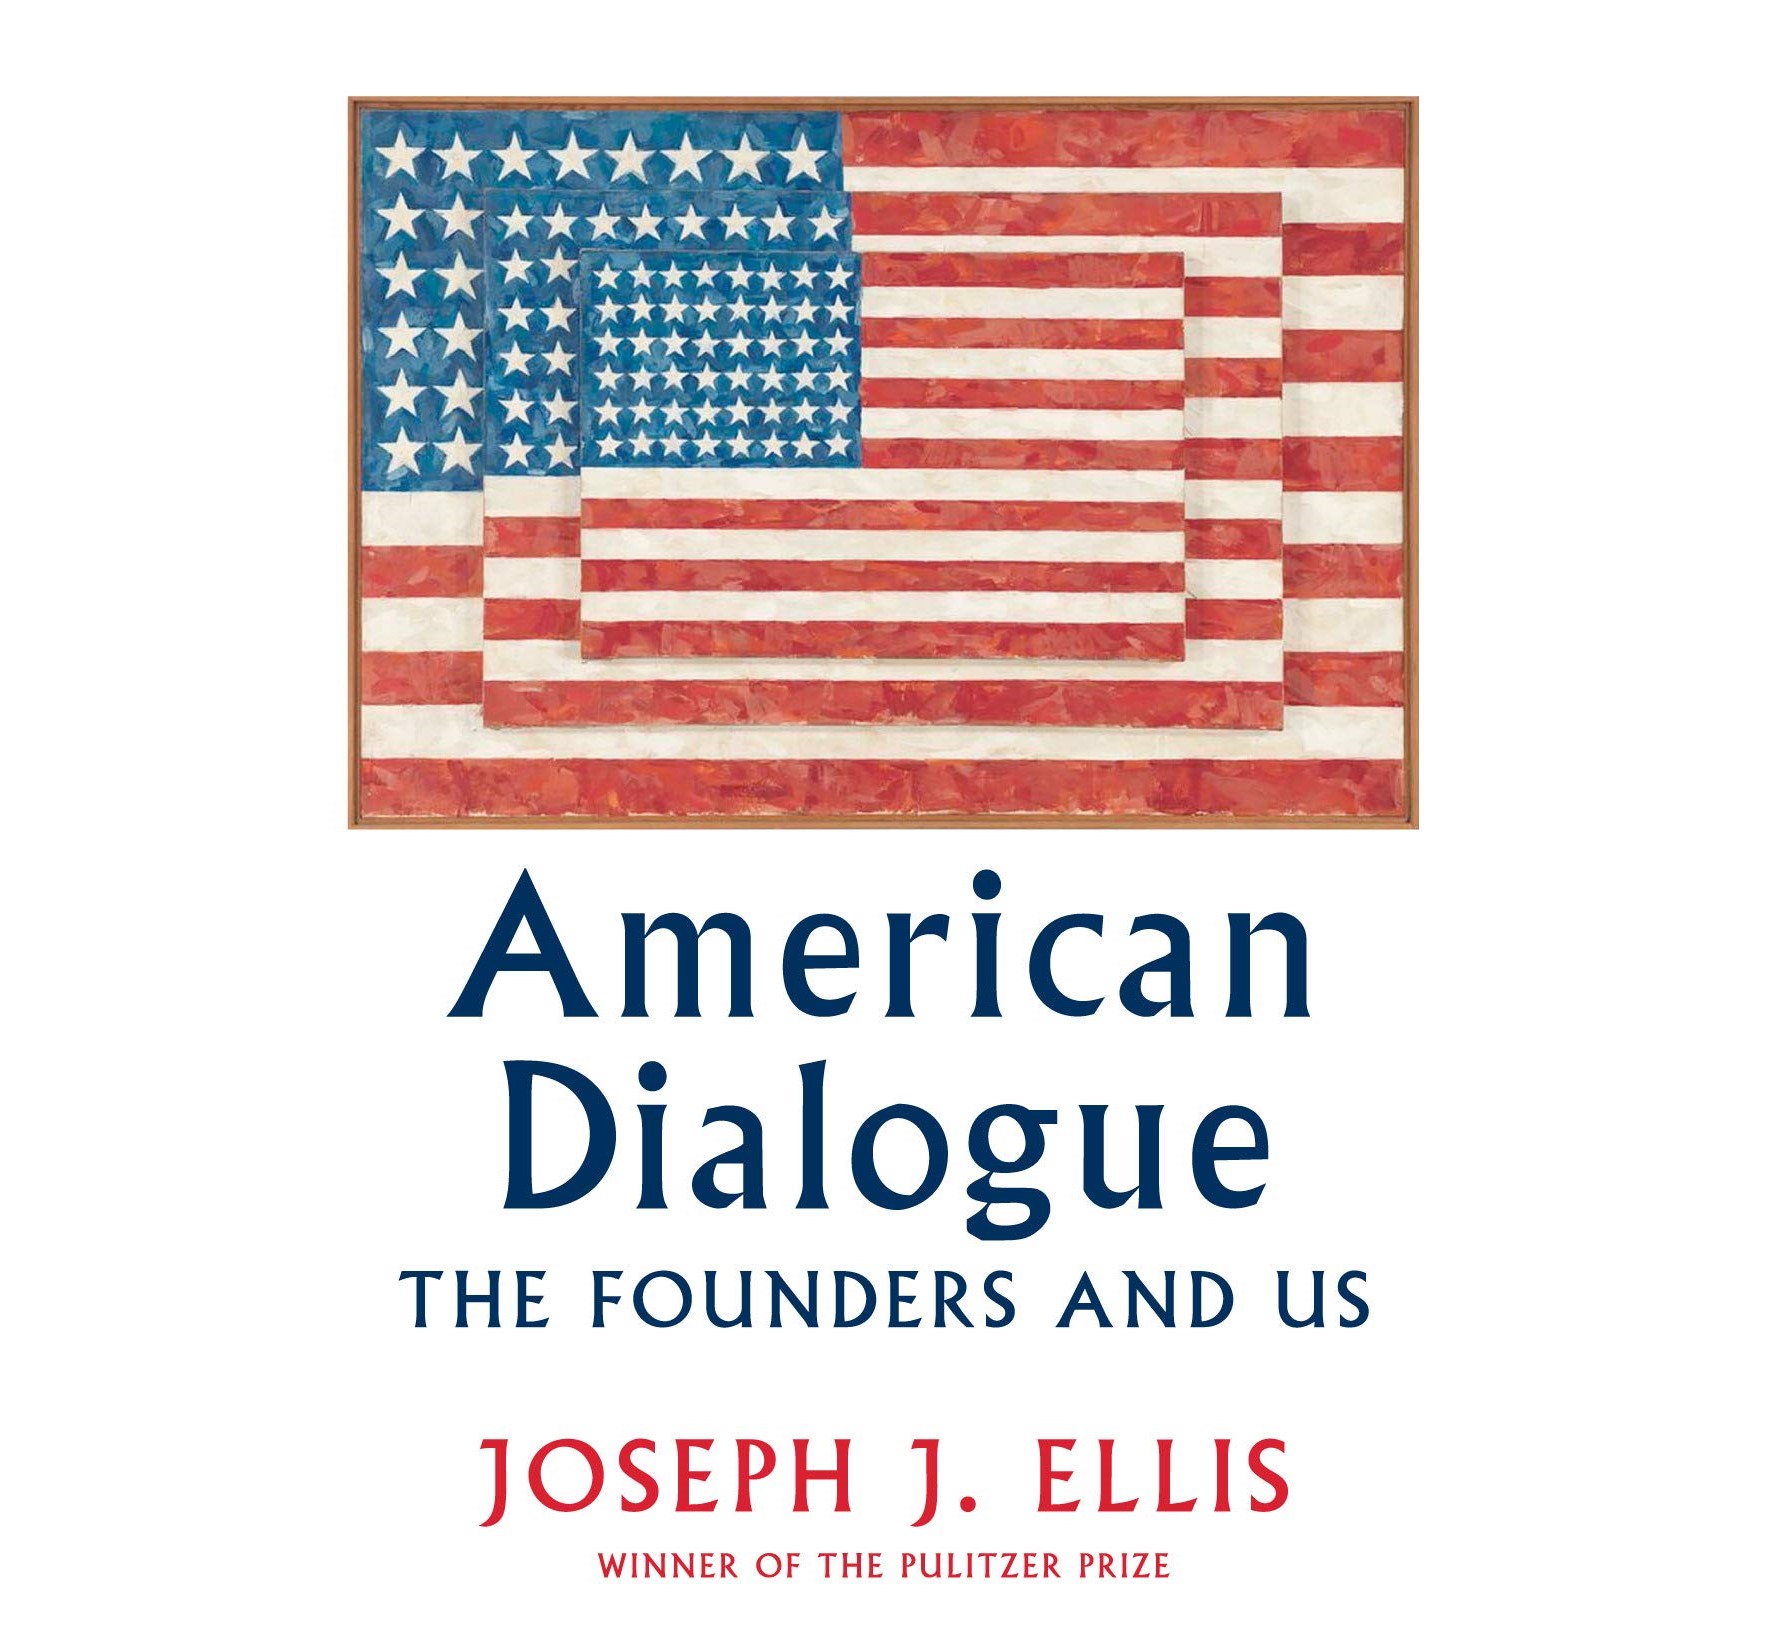 American Dialogue: The Founders and Us by Joseph J. Ellis